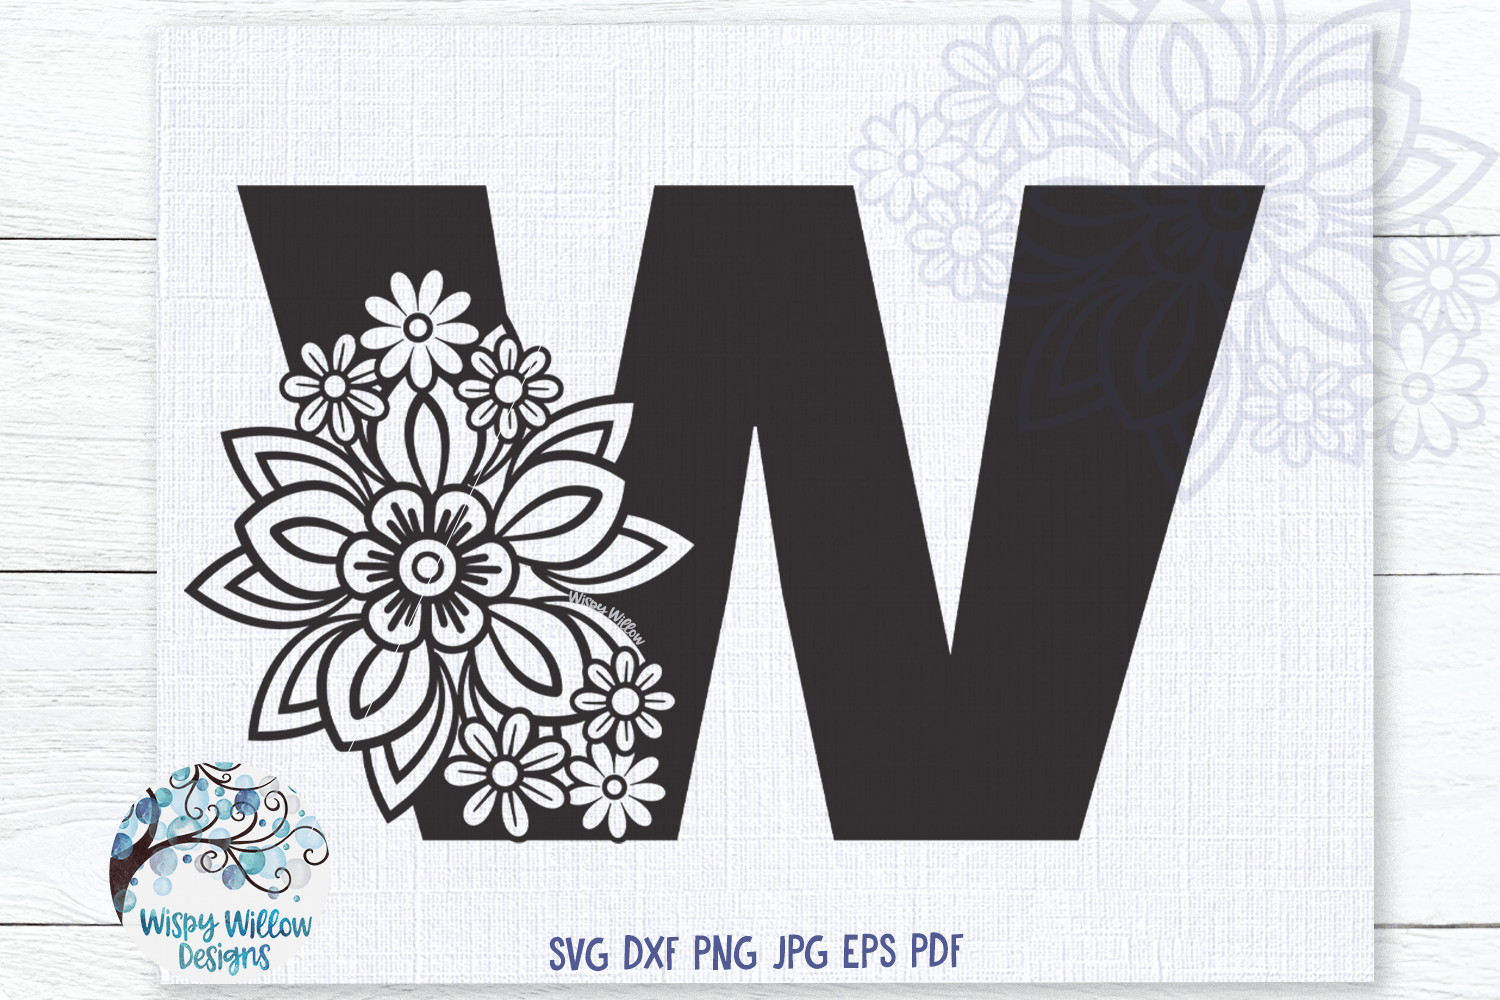 Floral Letter W SVG Wispy Willow Designs Company